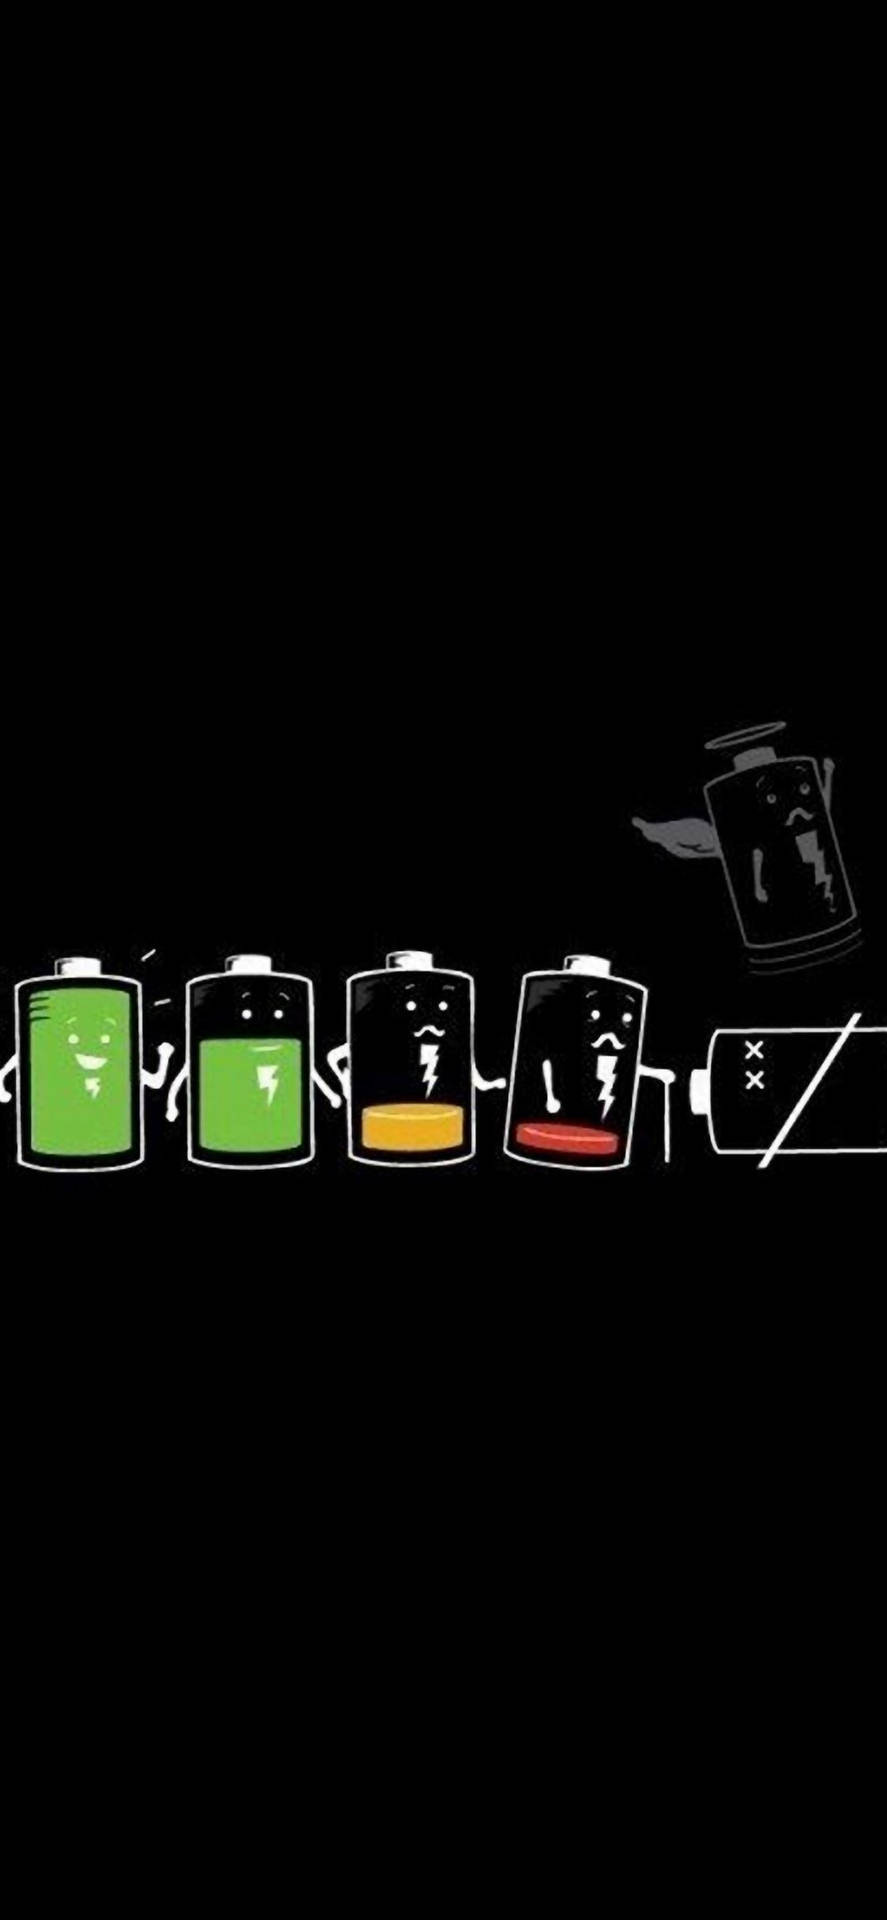 Prolonged Battery Life Cycle of an iPhone in Dark Mode Wallpaper